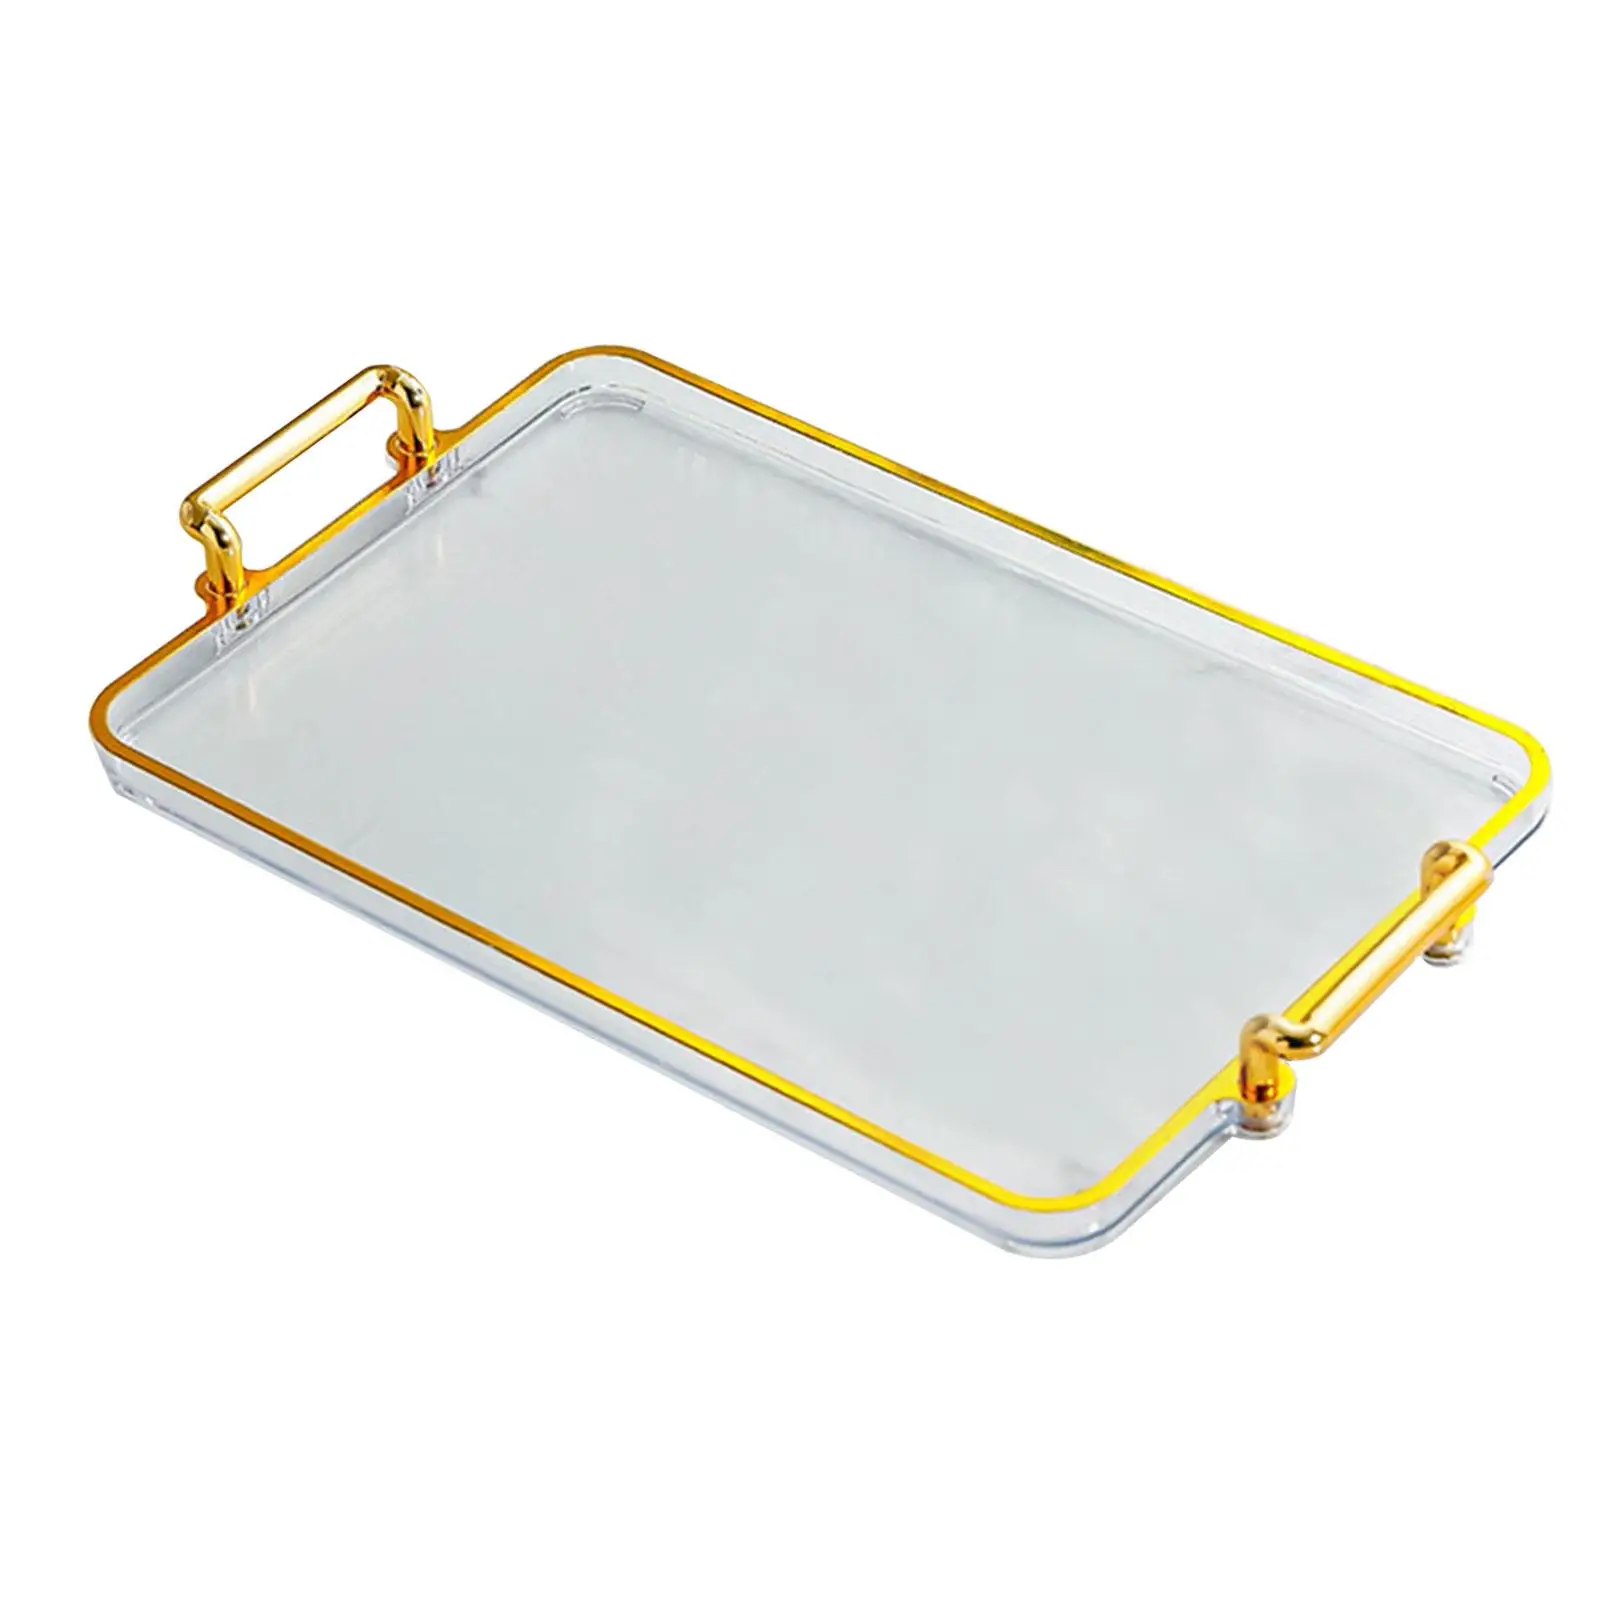 Serving Tray Platter Cosmetic Storage Decorative Tray Eating